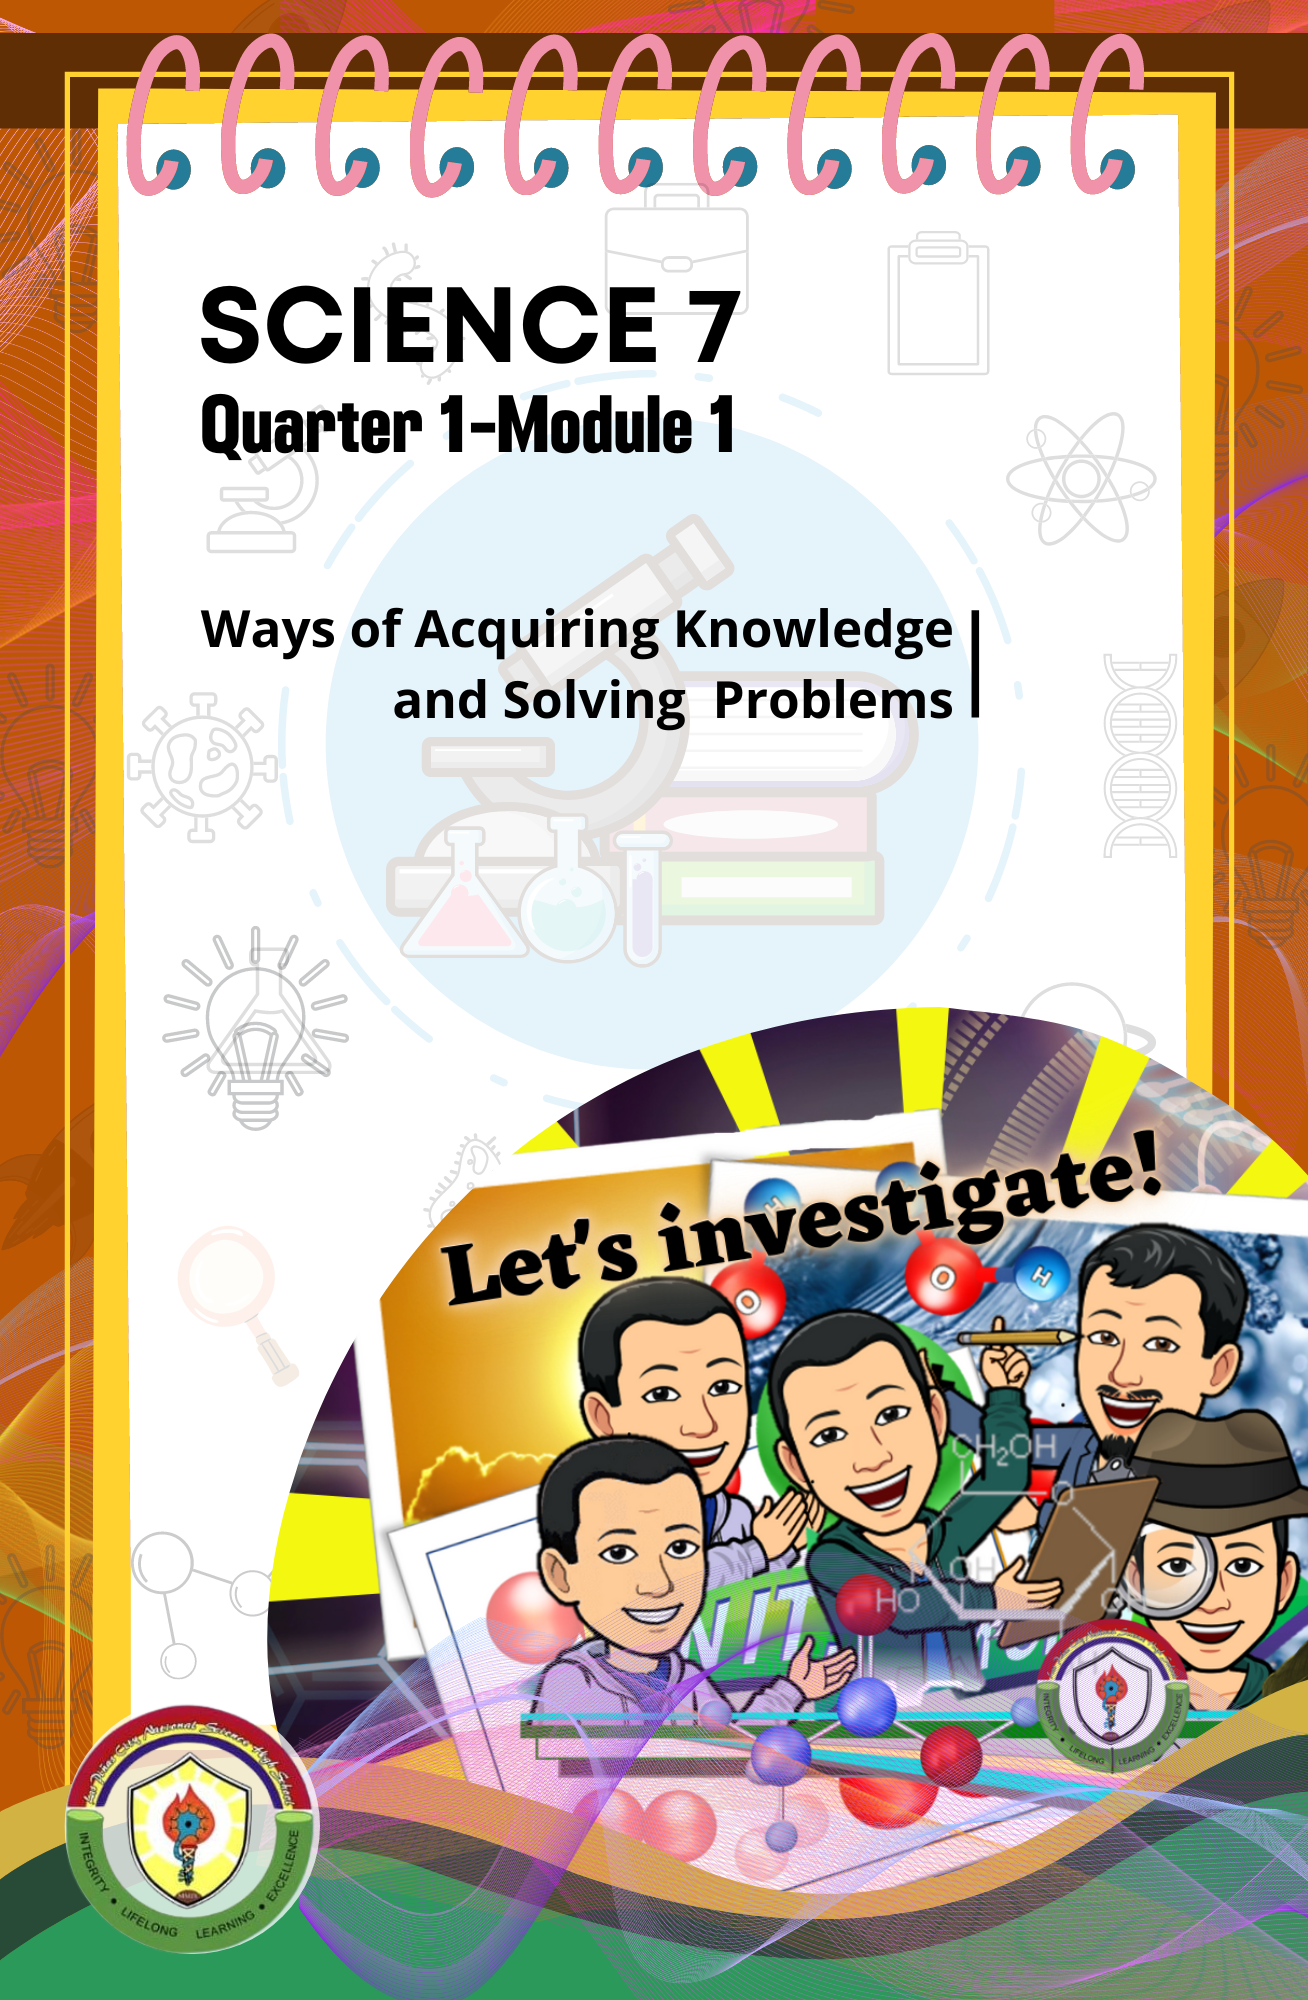 320304_Las Piñas City National Science High School_Science_7_Quarter 1_Module 1_Ways of Acquiring Knowledge and Solving Problems